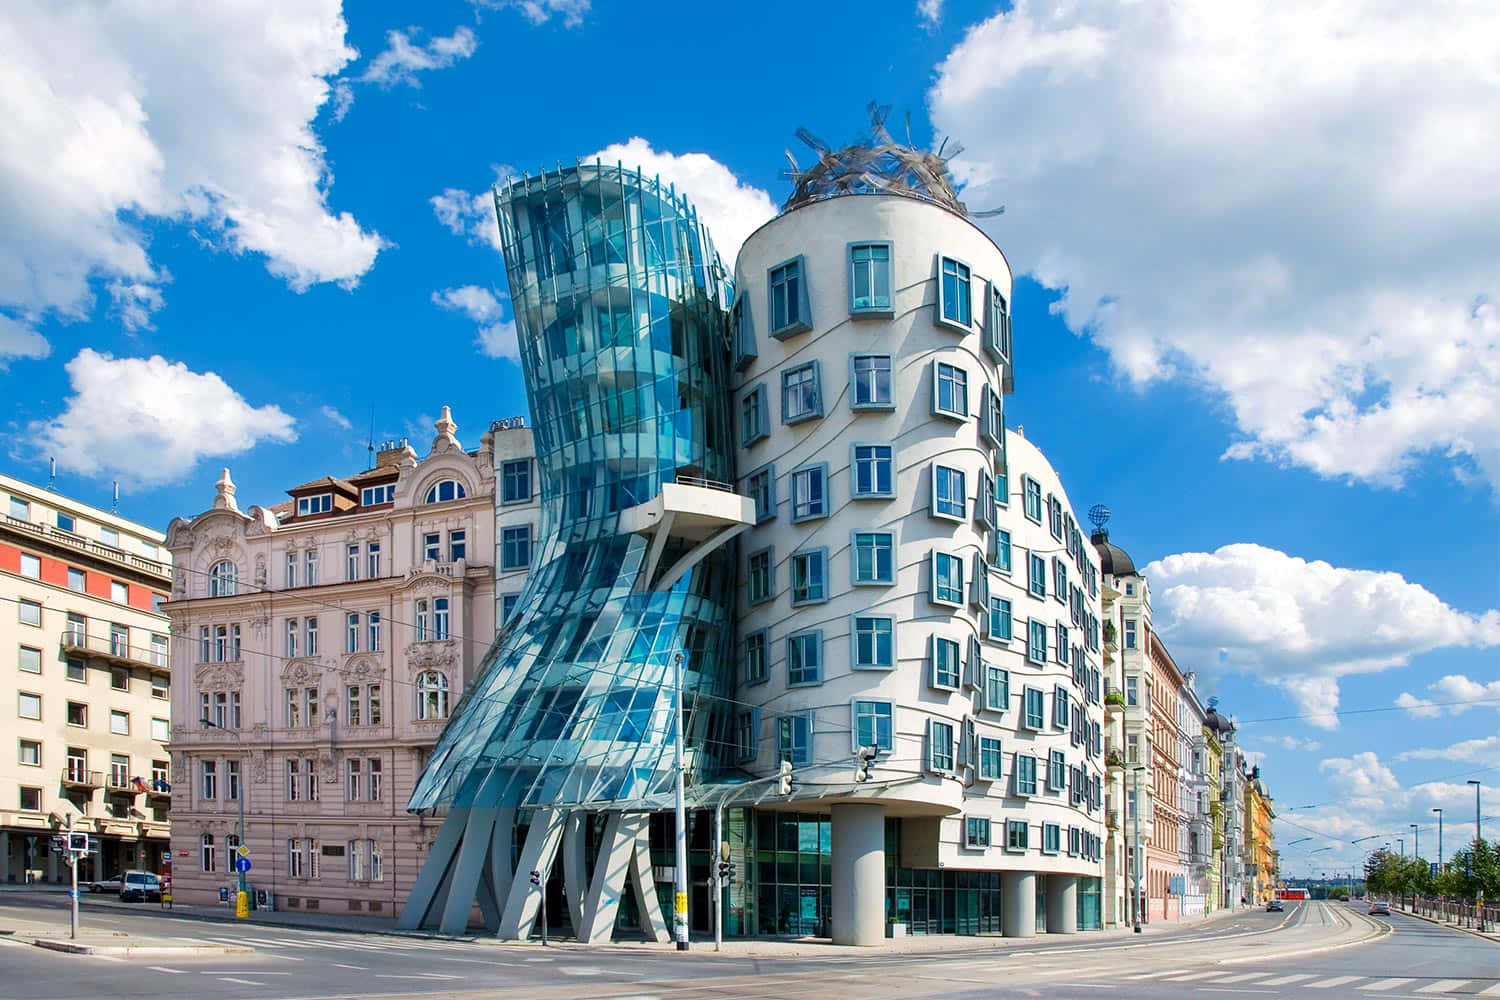 An exquisite capture of the Dancing House under the radiant sun. Wallpaper